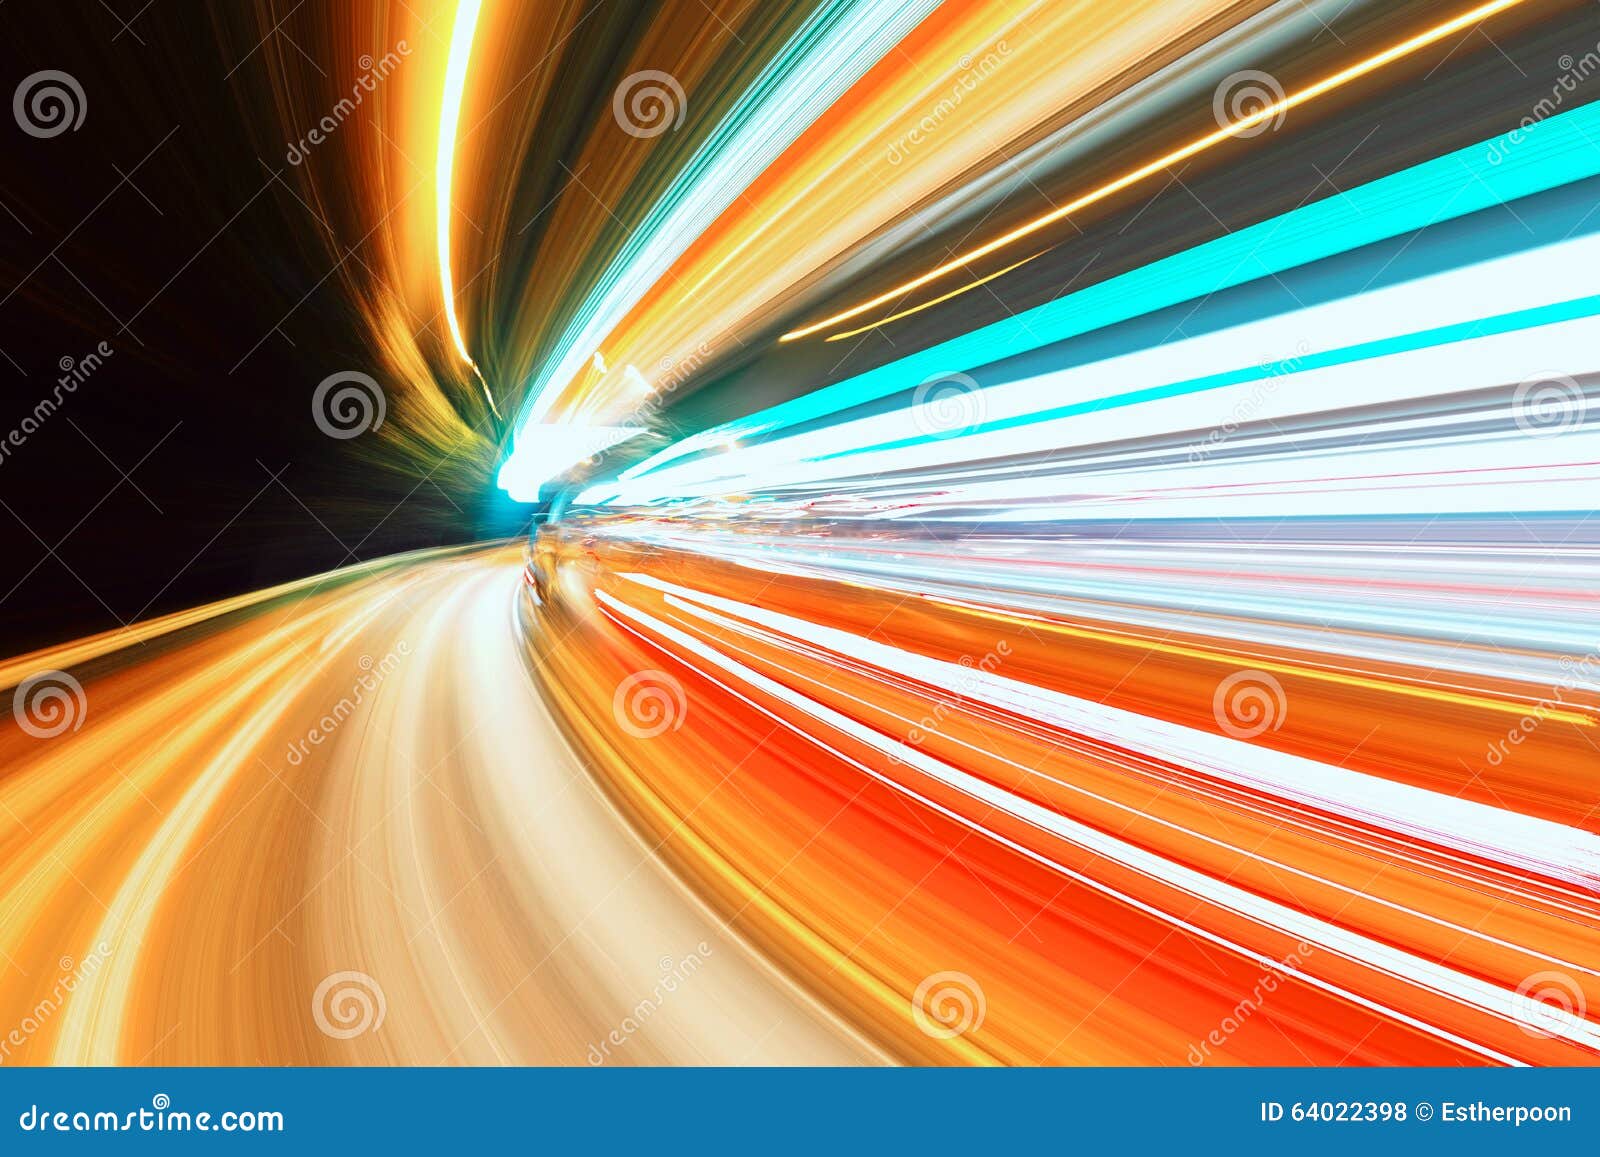 abstract speed motion on a highway road